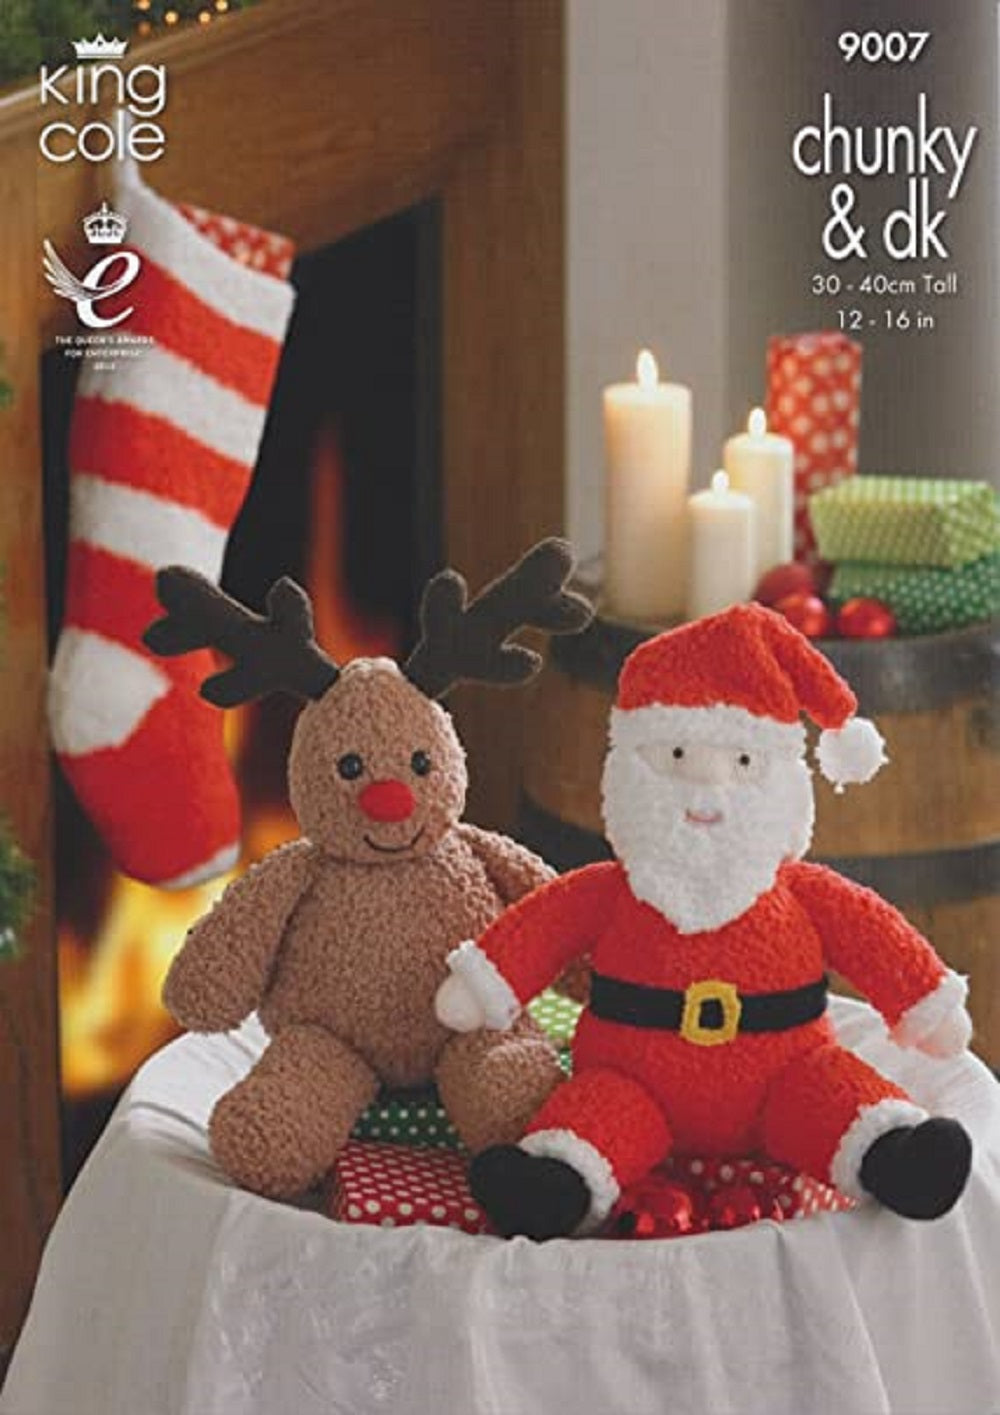 King Cole 9007 Chunky Christmas Toy Knitting Pattern